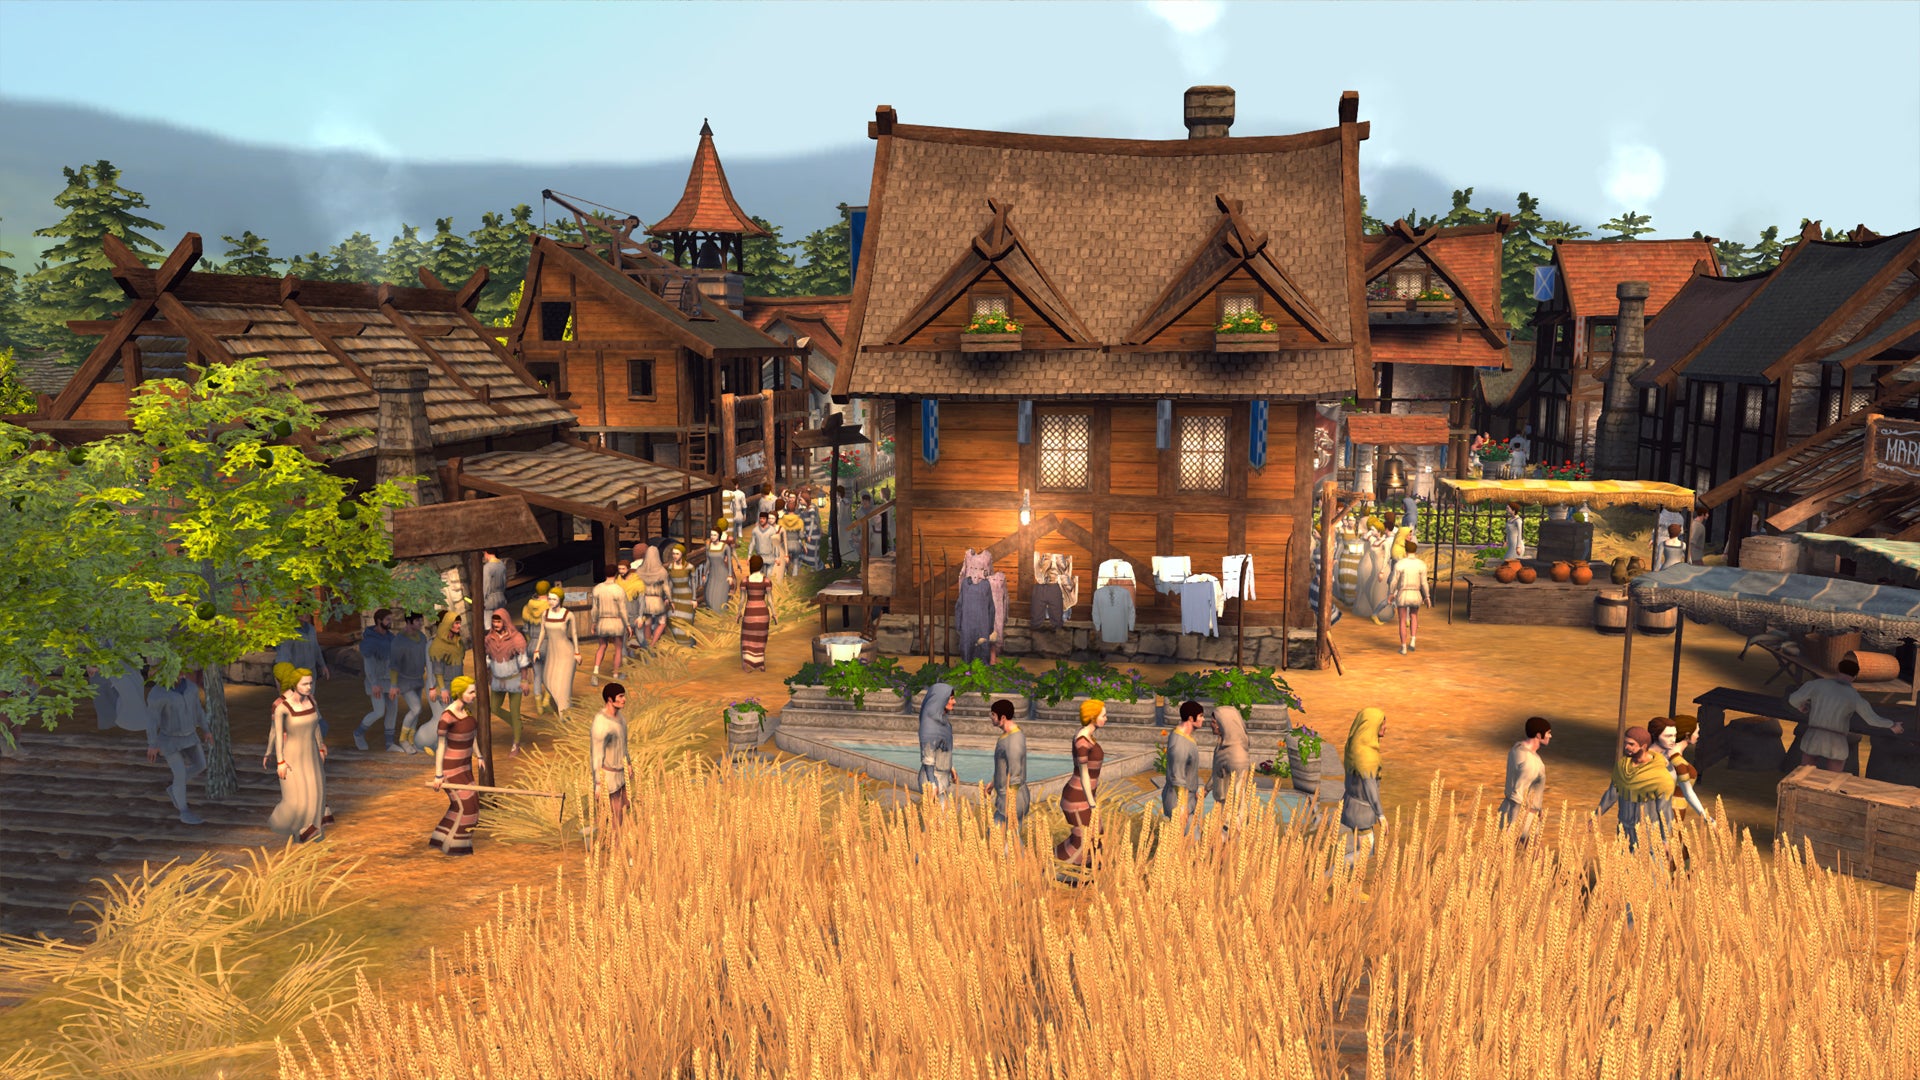 A screenshot of citybuilder Patron, showing an old wooden house with washing hanging outside surrounded by milling pedestrians, wheat crops, in what looks like a ye olde market town.